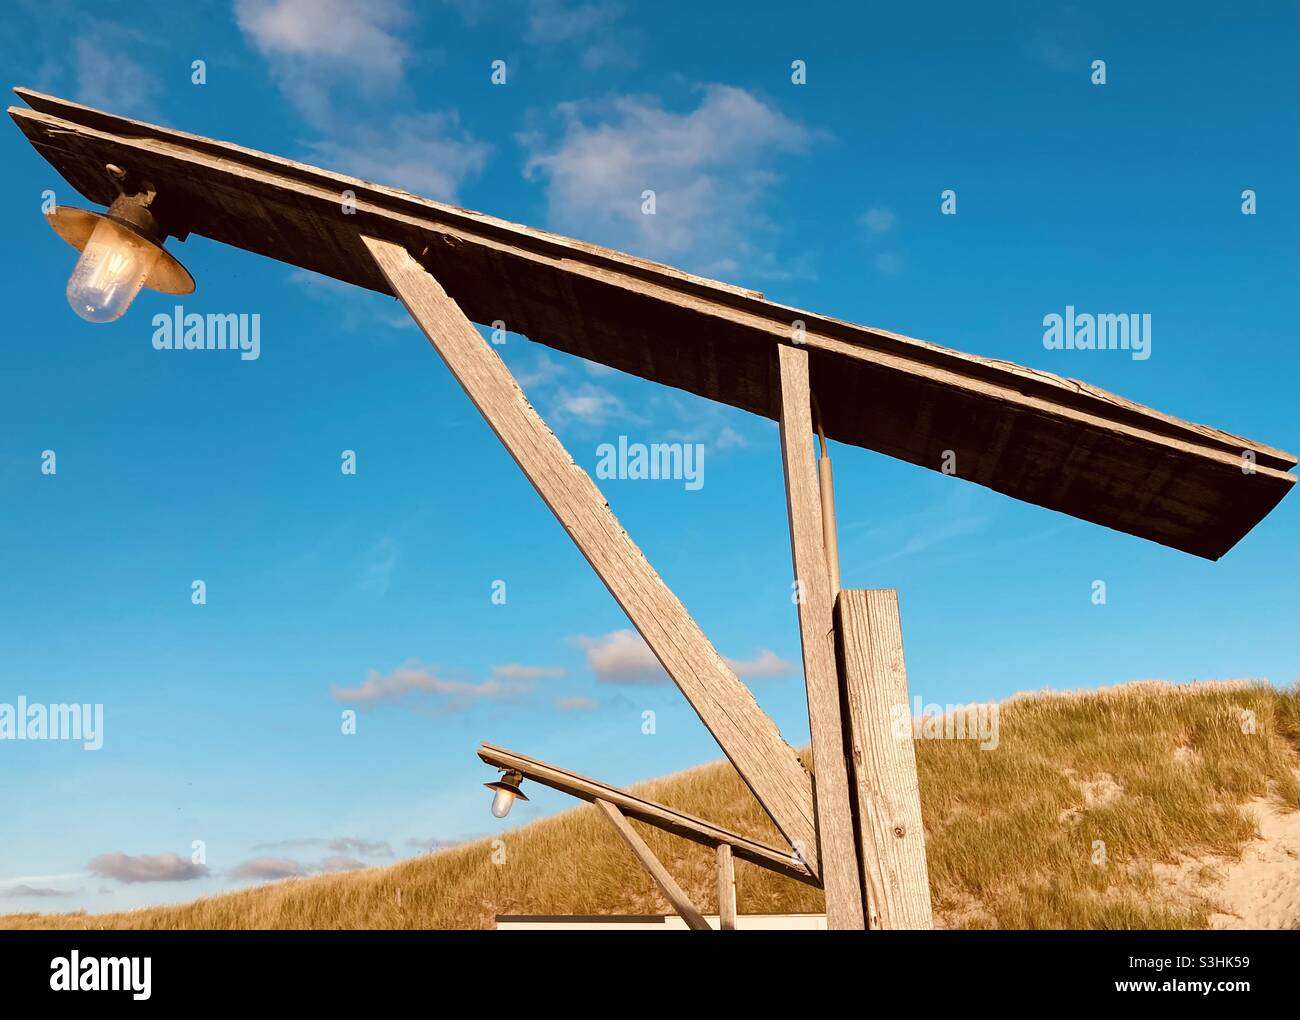 a burning lamp against a blue sky in broad daylight attached to a wooden gallows Stock Photo